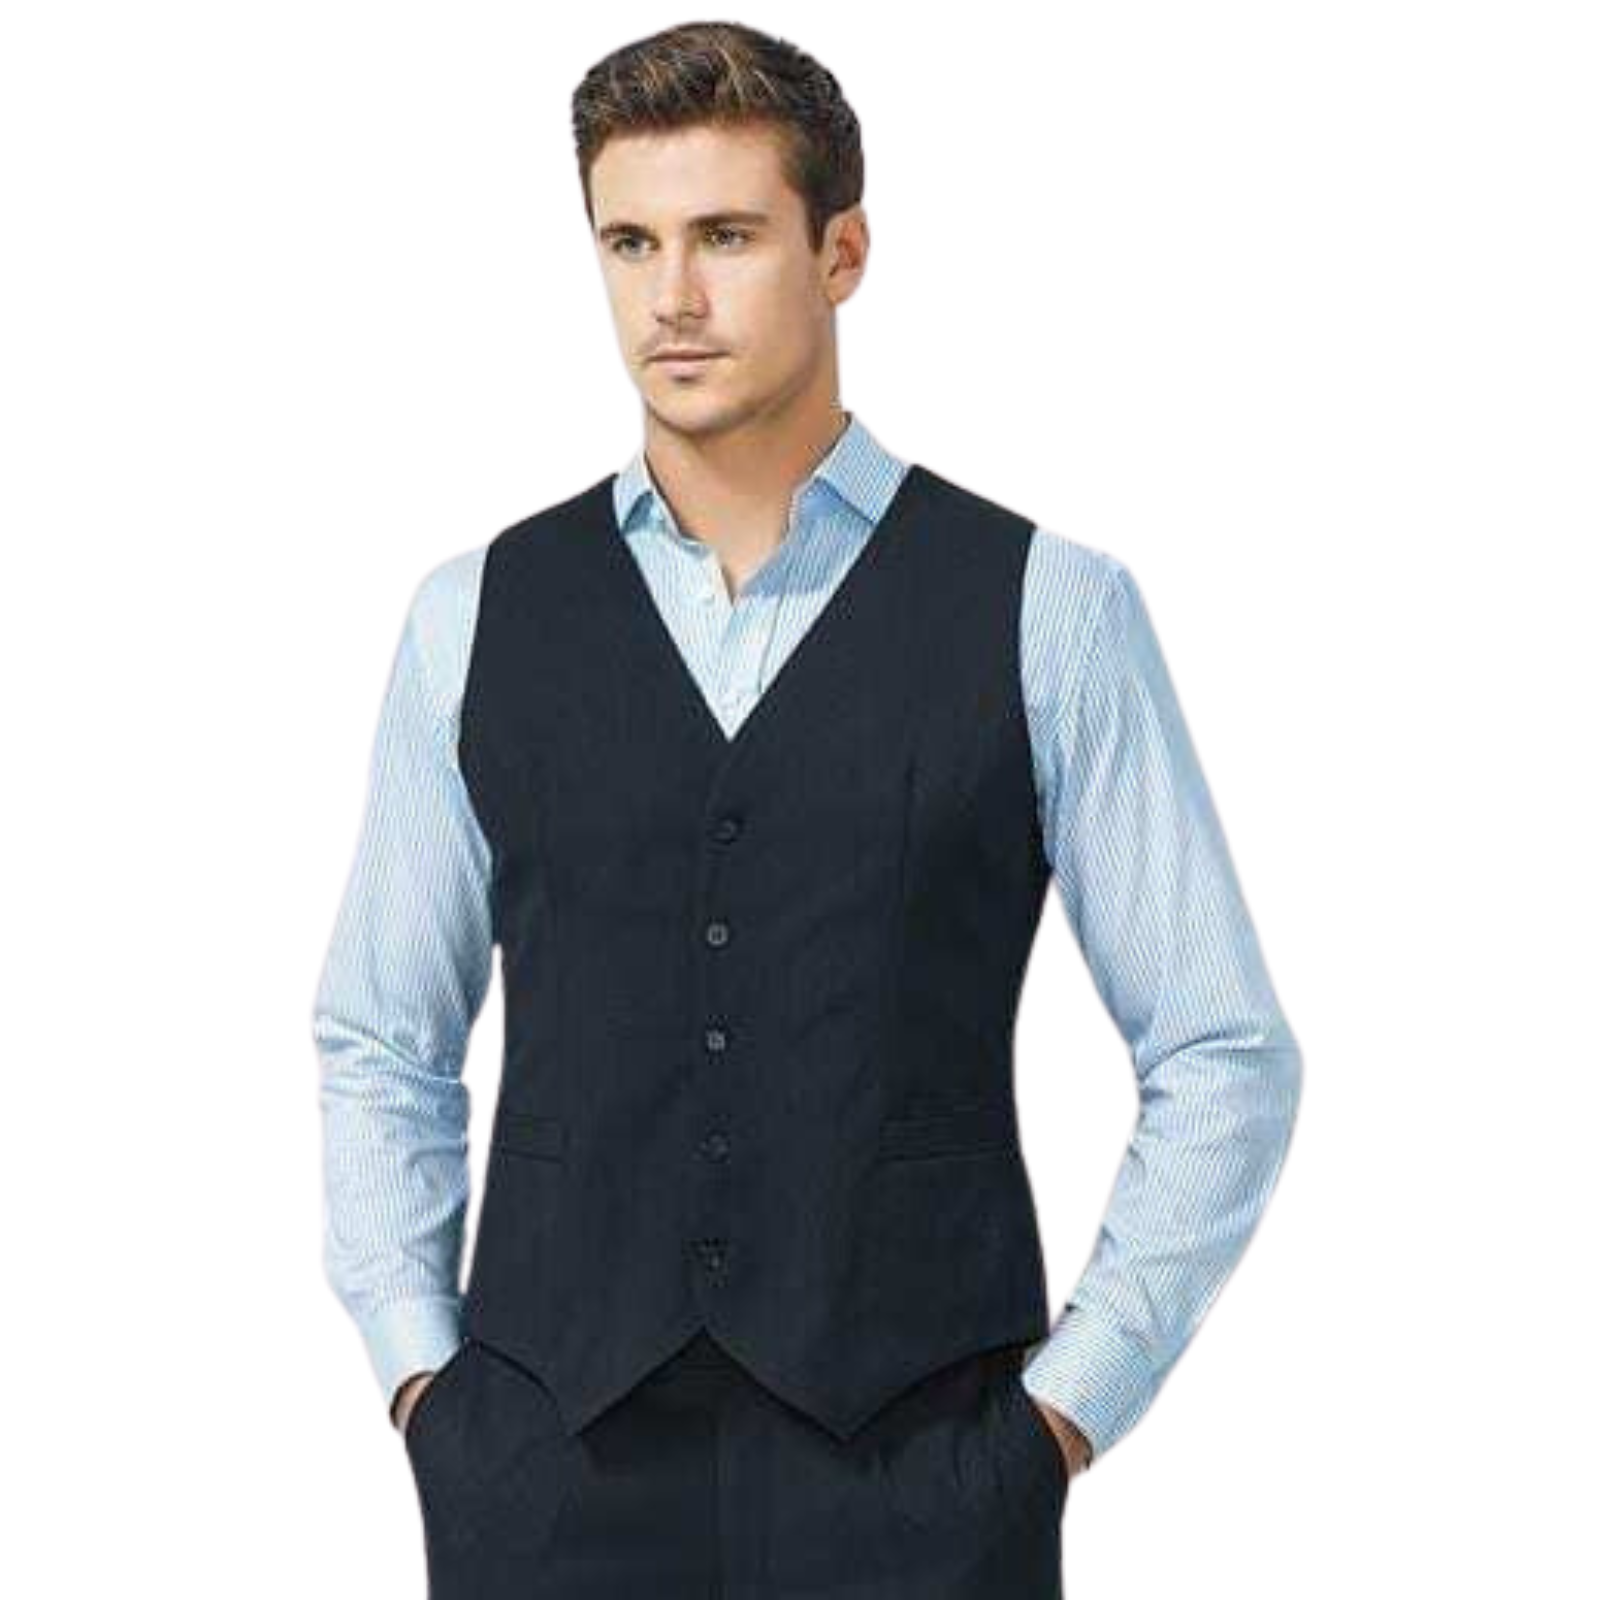 Mens Peaked Vest Waistcoat w/ Knitted Back Suit Formal Wedding Dress Up - Navy - 122